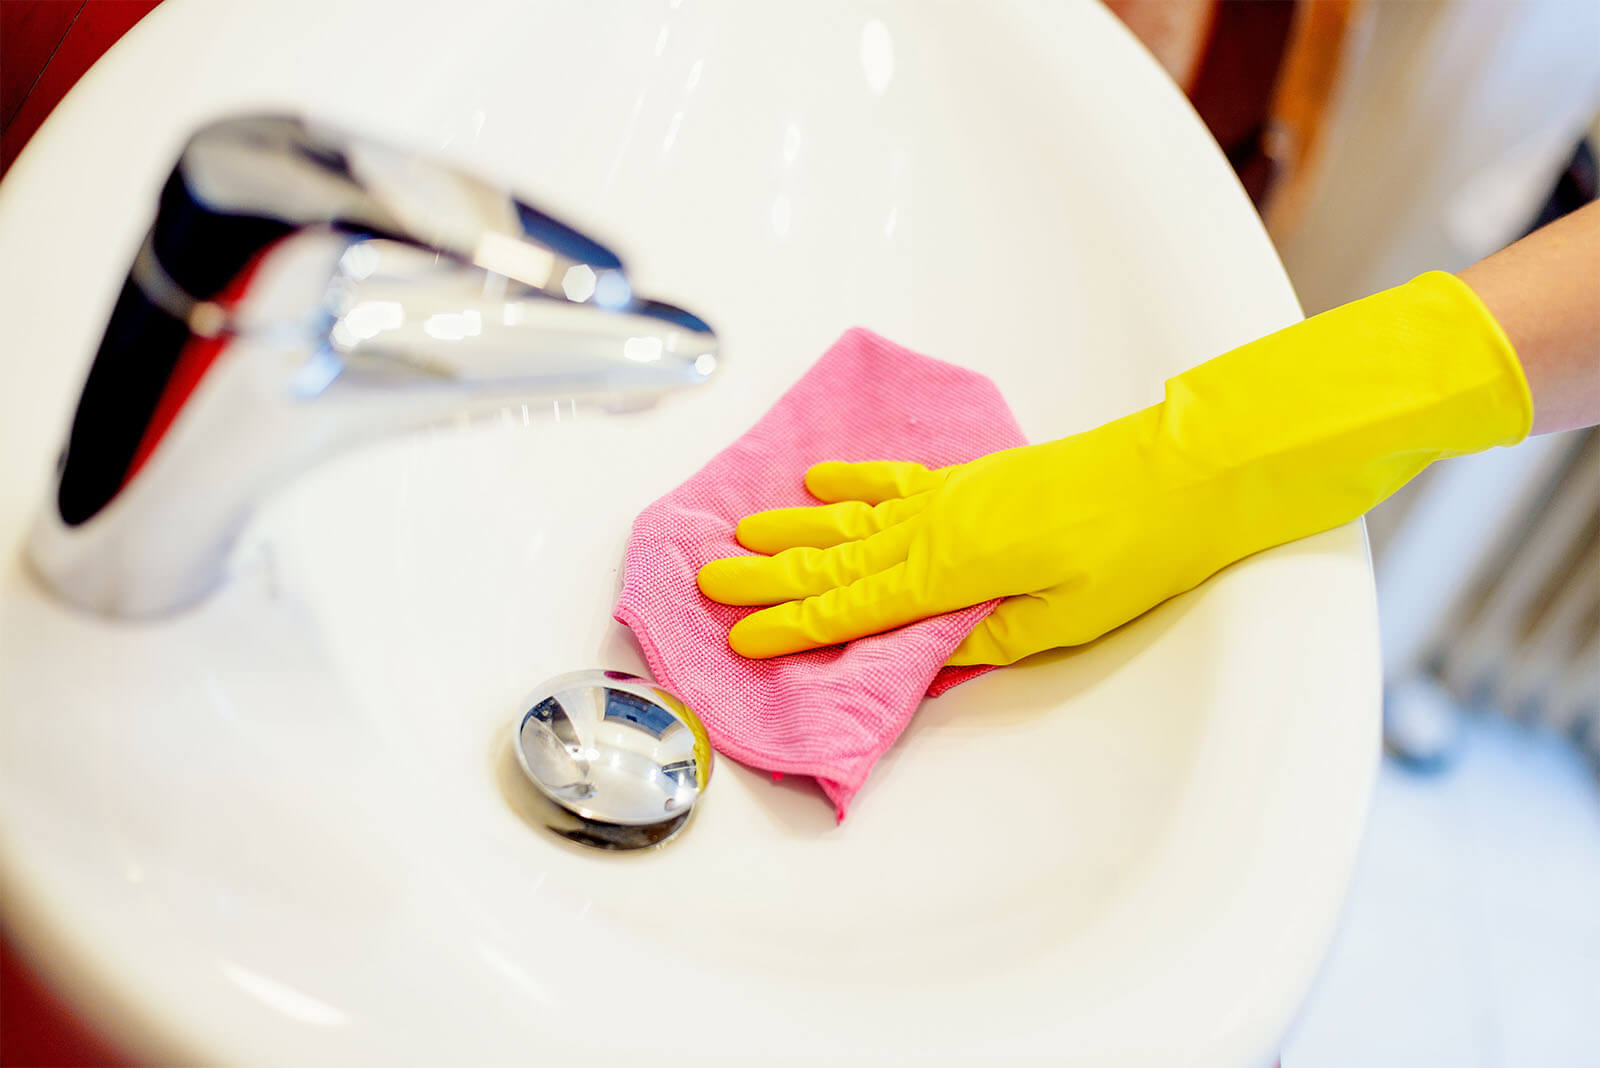 remove odor from bathroom sink